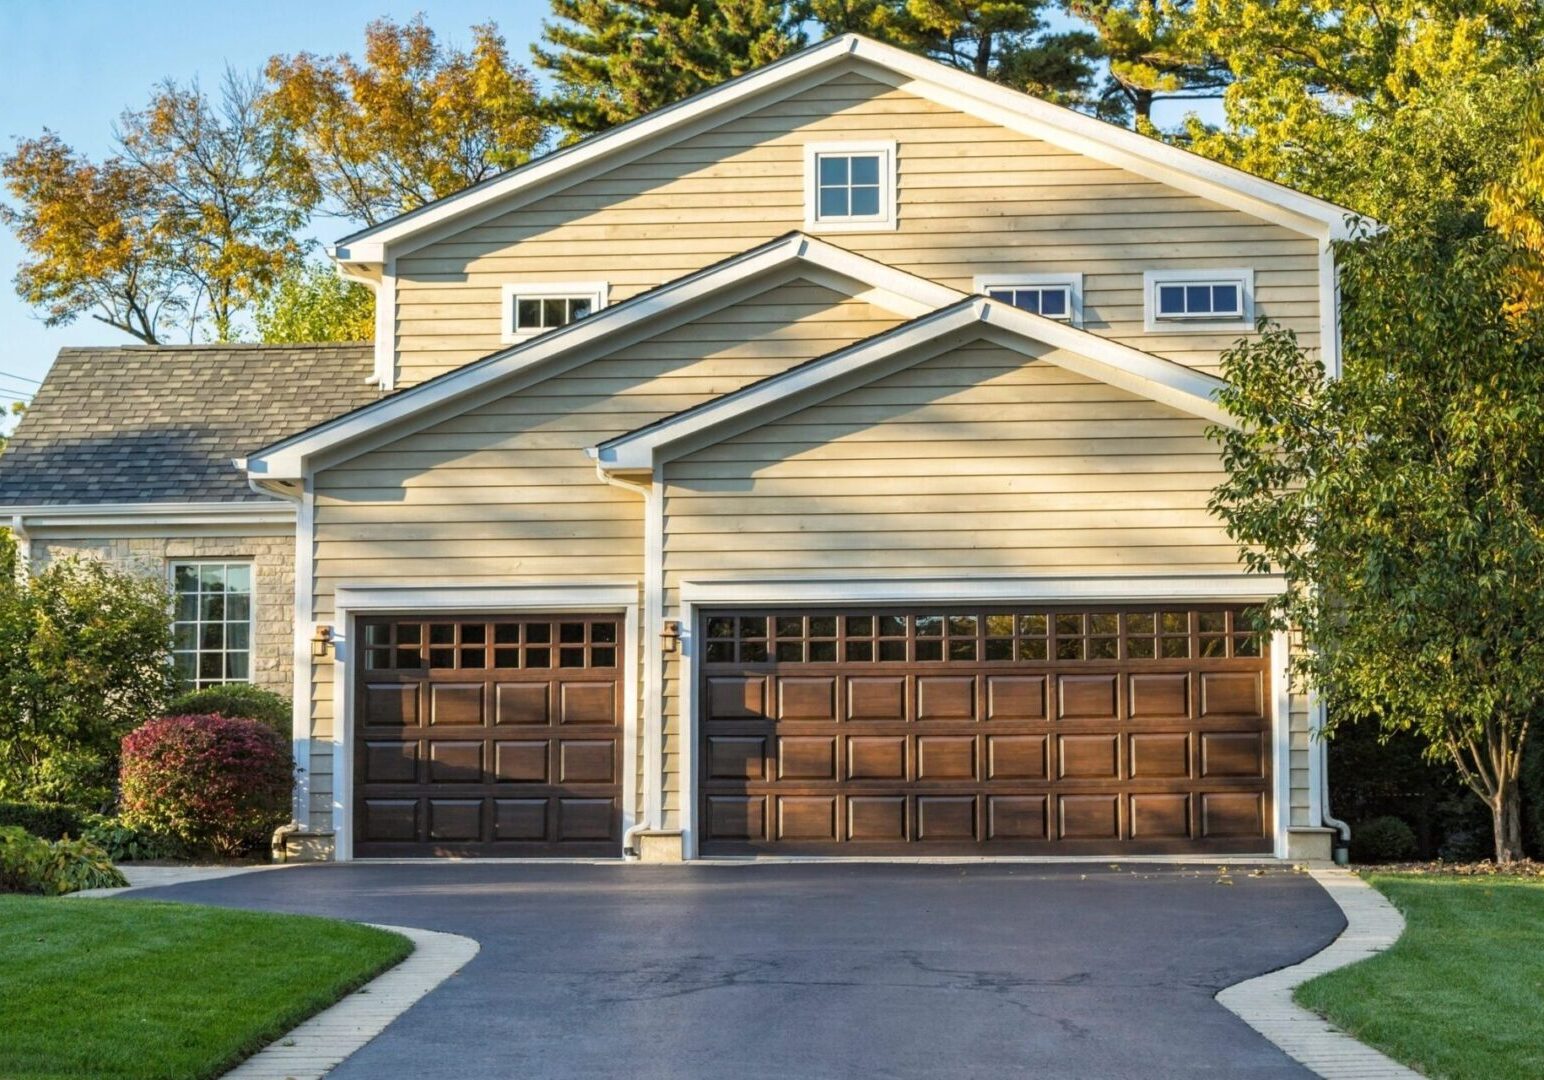 A two car garage with the doors open.